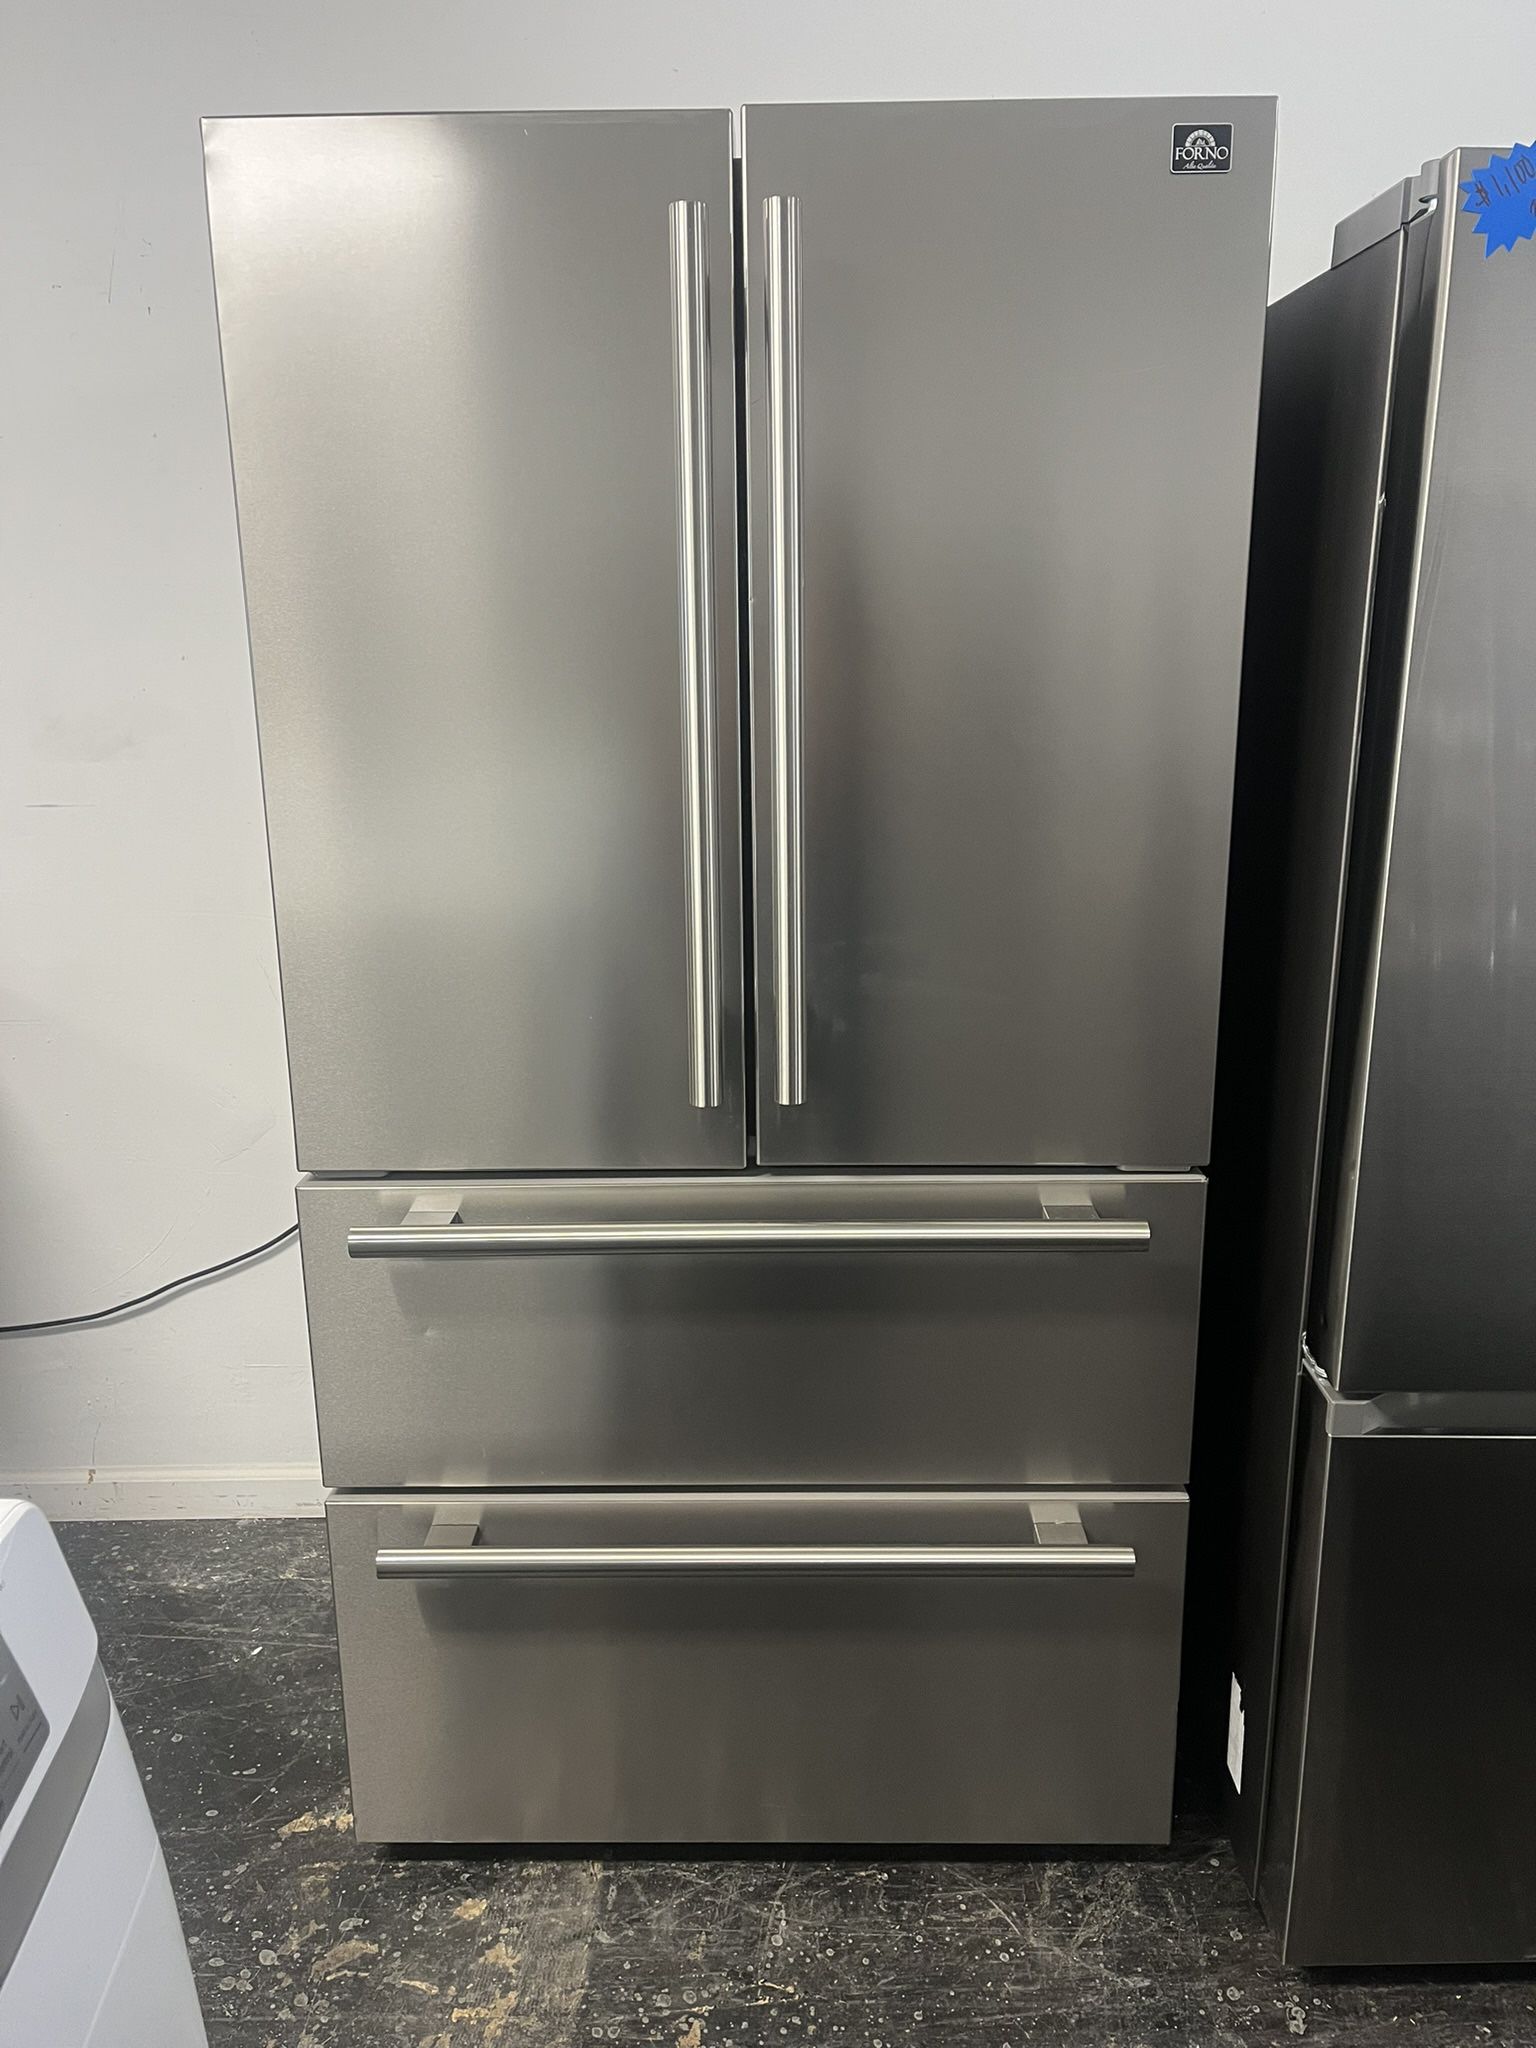 ‼️‼️ FORNO 4 Door Refrigerator Stainless Steel ‼️‼️